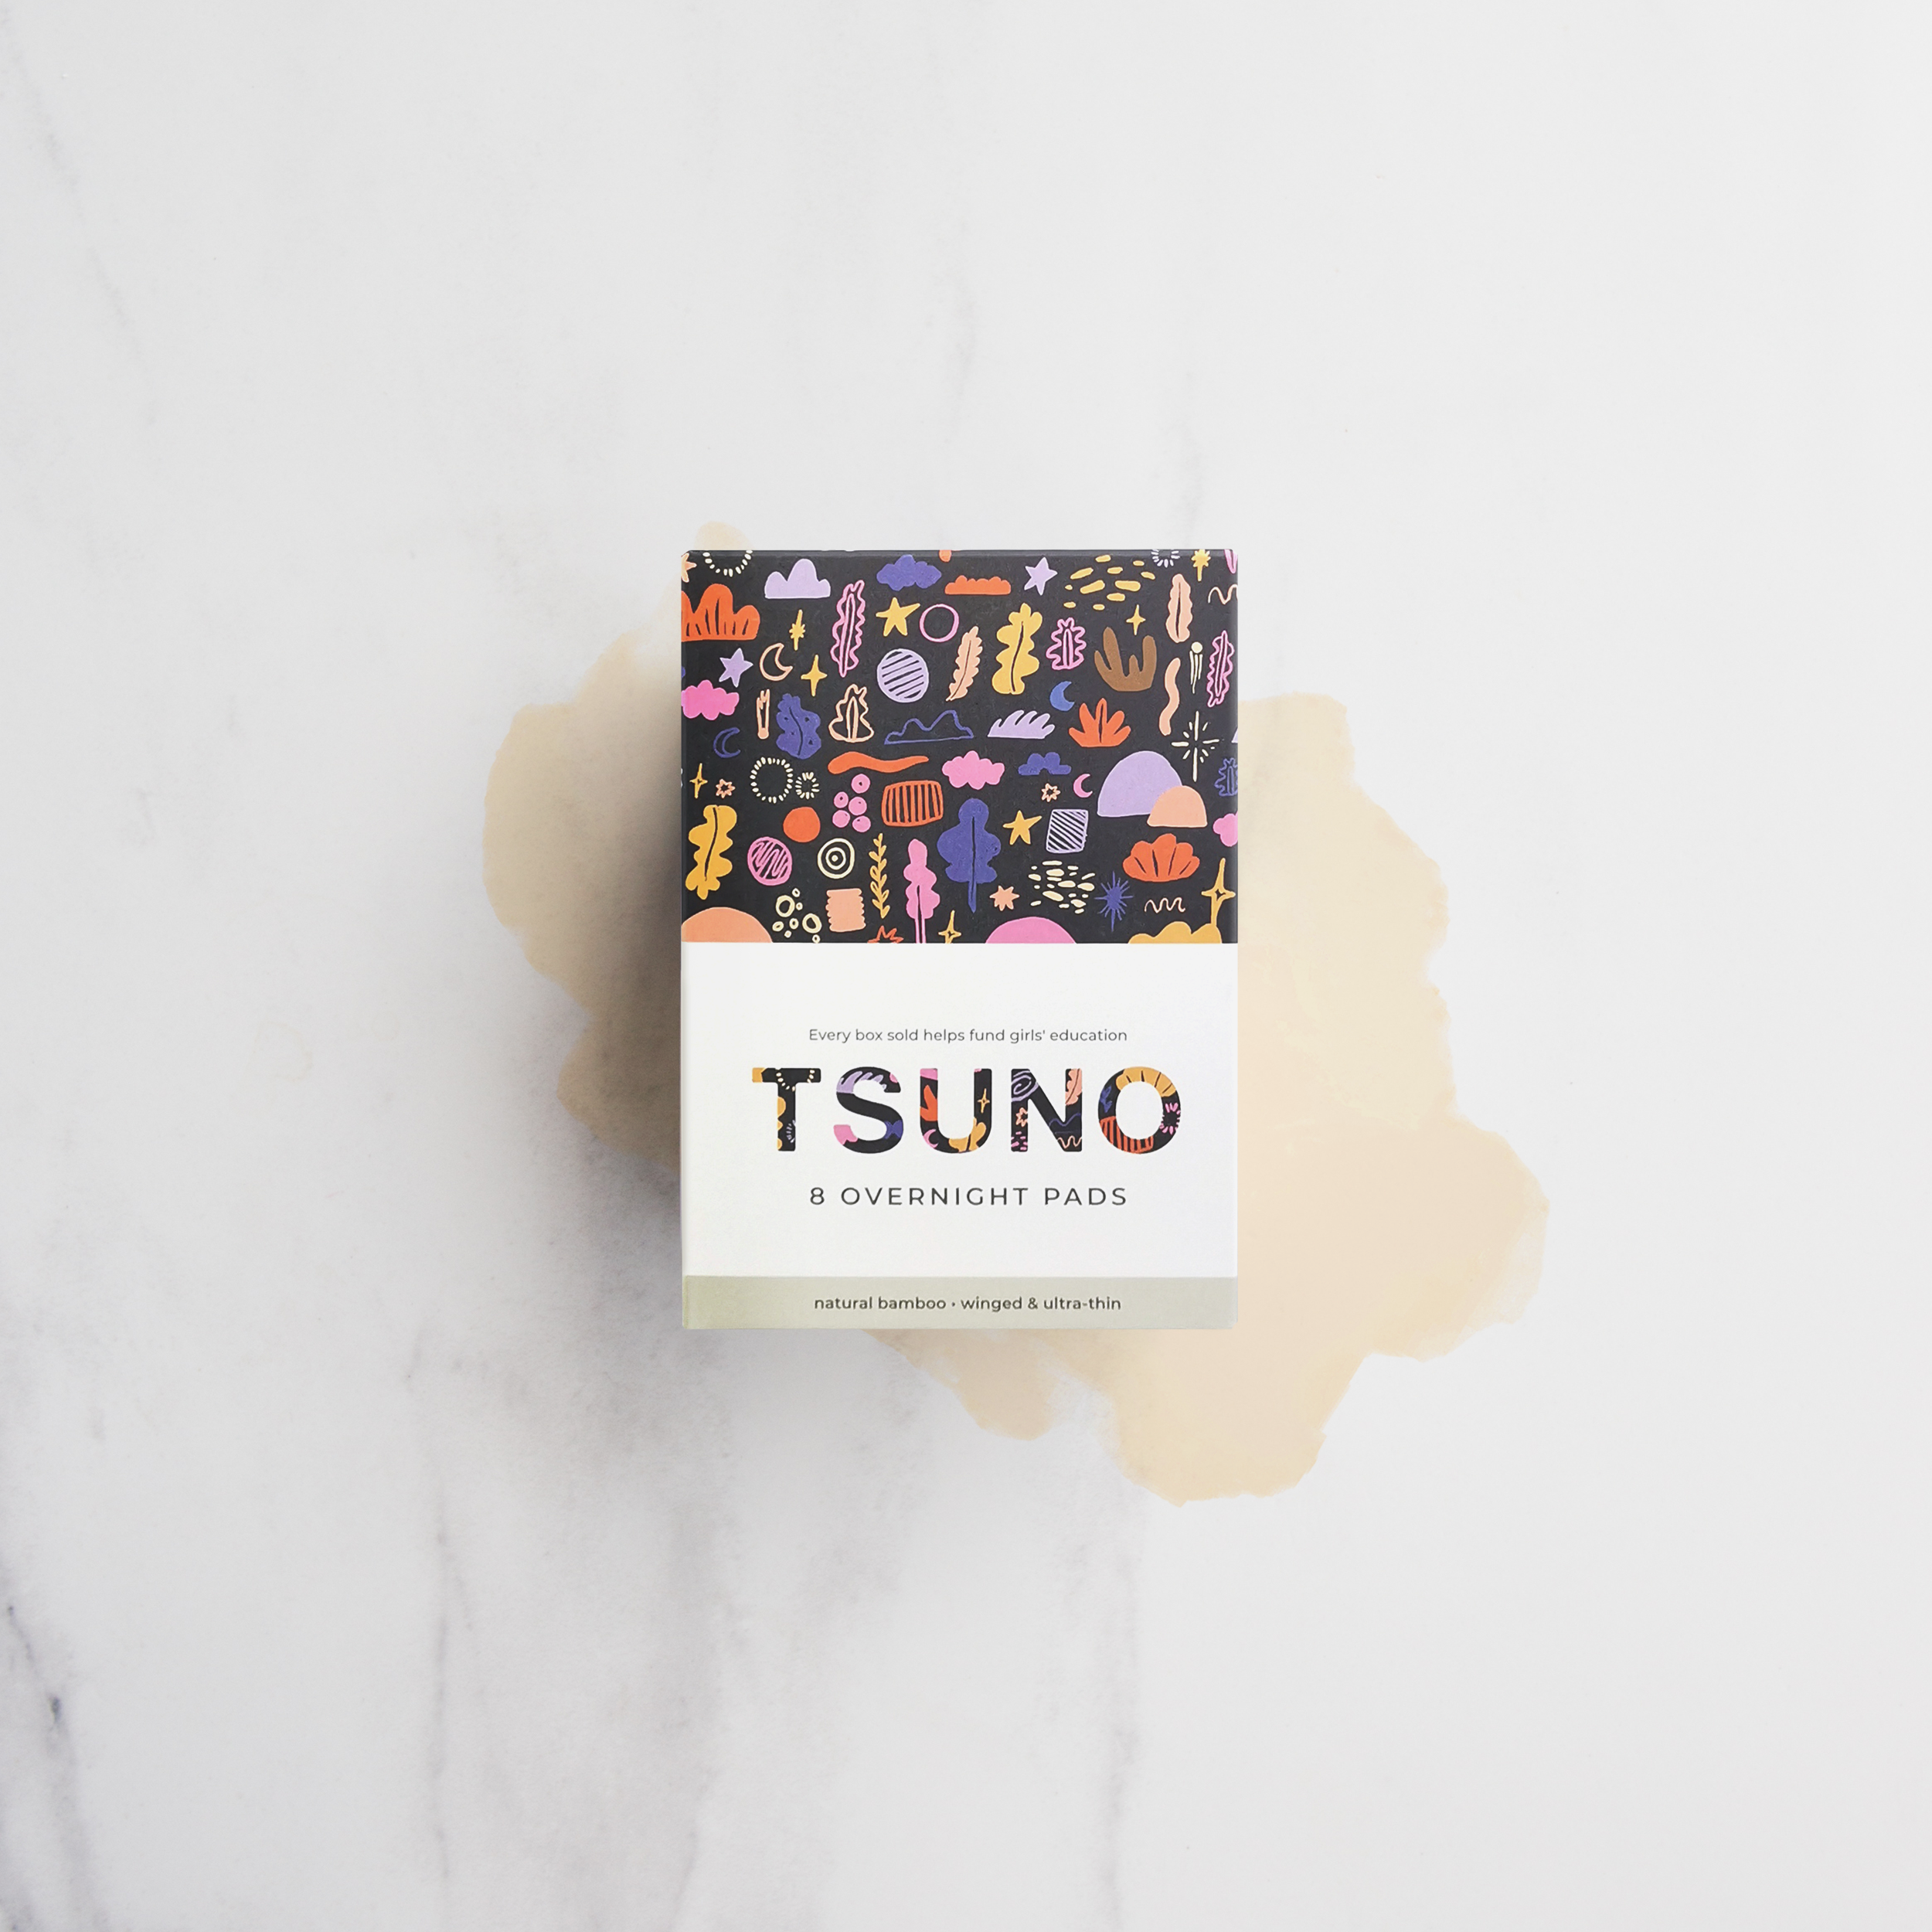 Tsuno Overnight Pads - Made from Natural Bamboo - Biodegradable